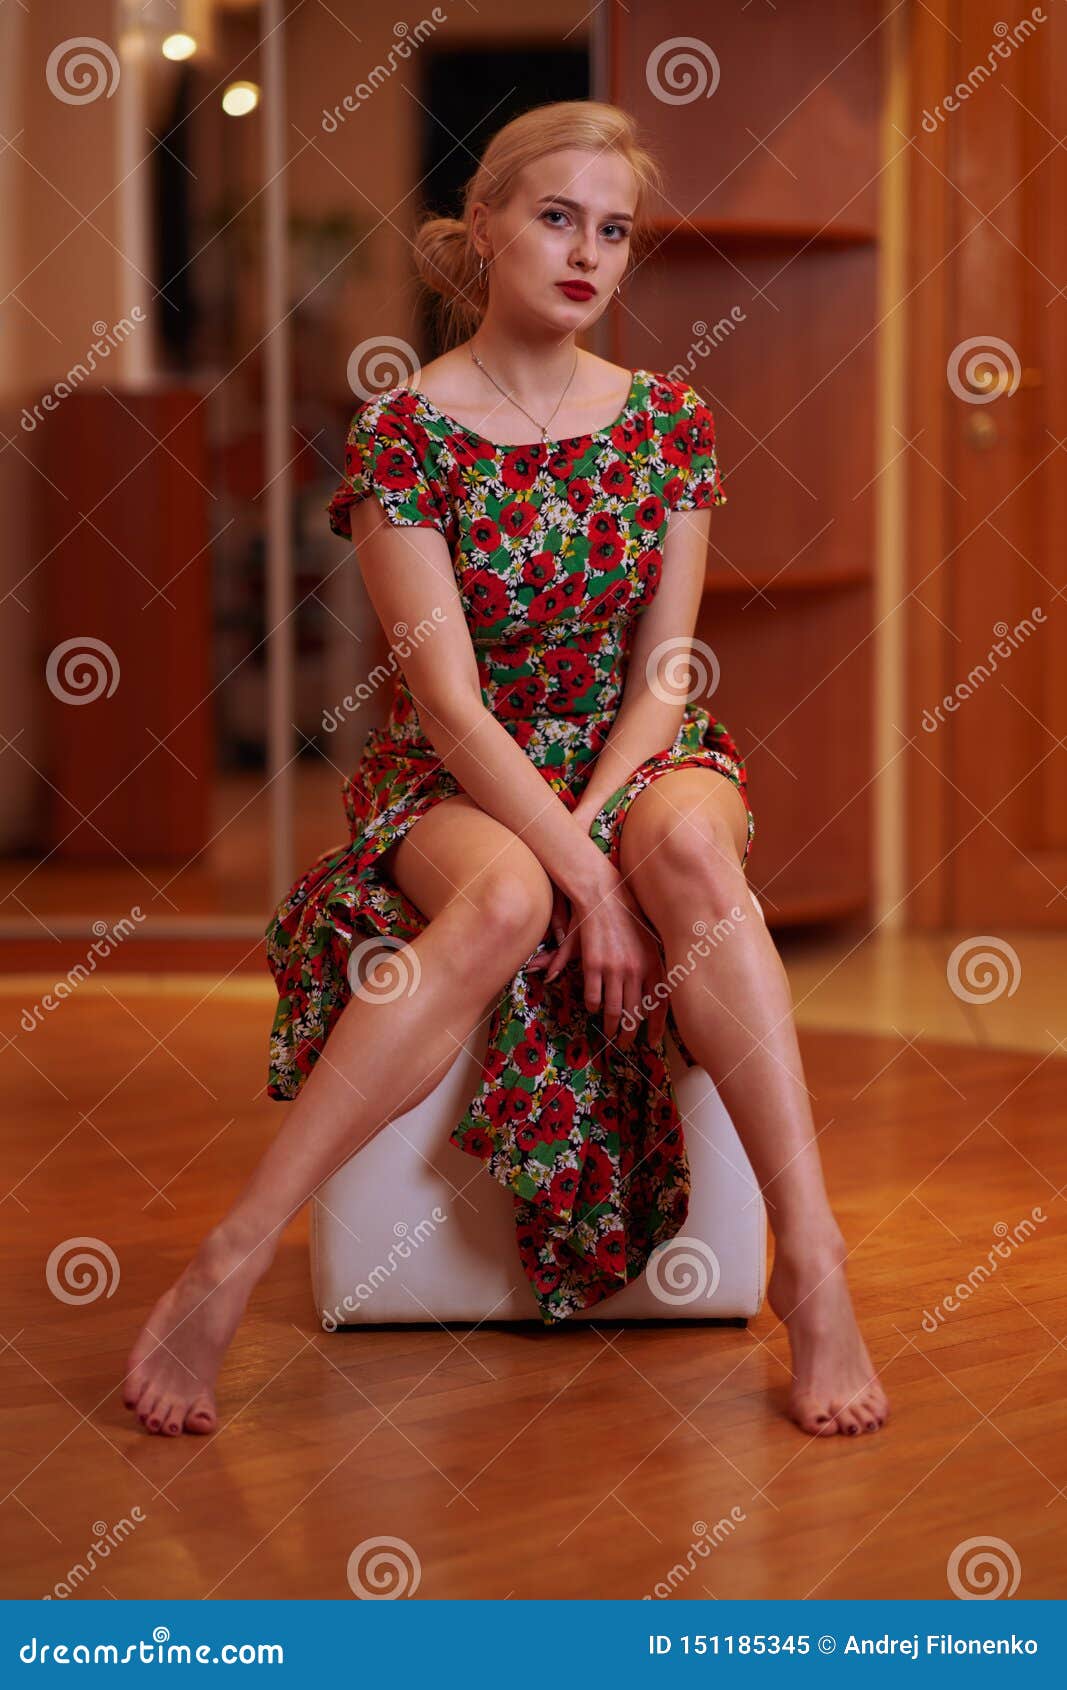 a young beautiful blonde with hair gathered in a chignon in a floral print dress sits on a ottoman in a home setting, pulling off